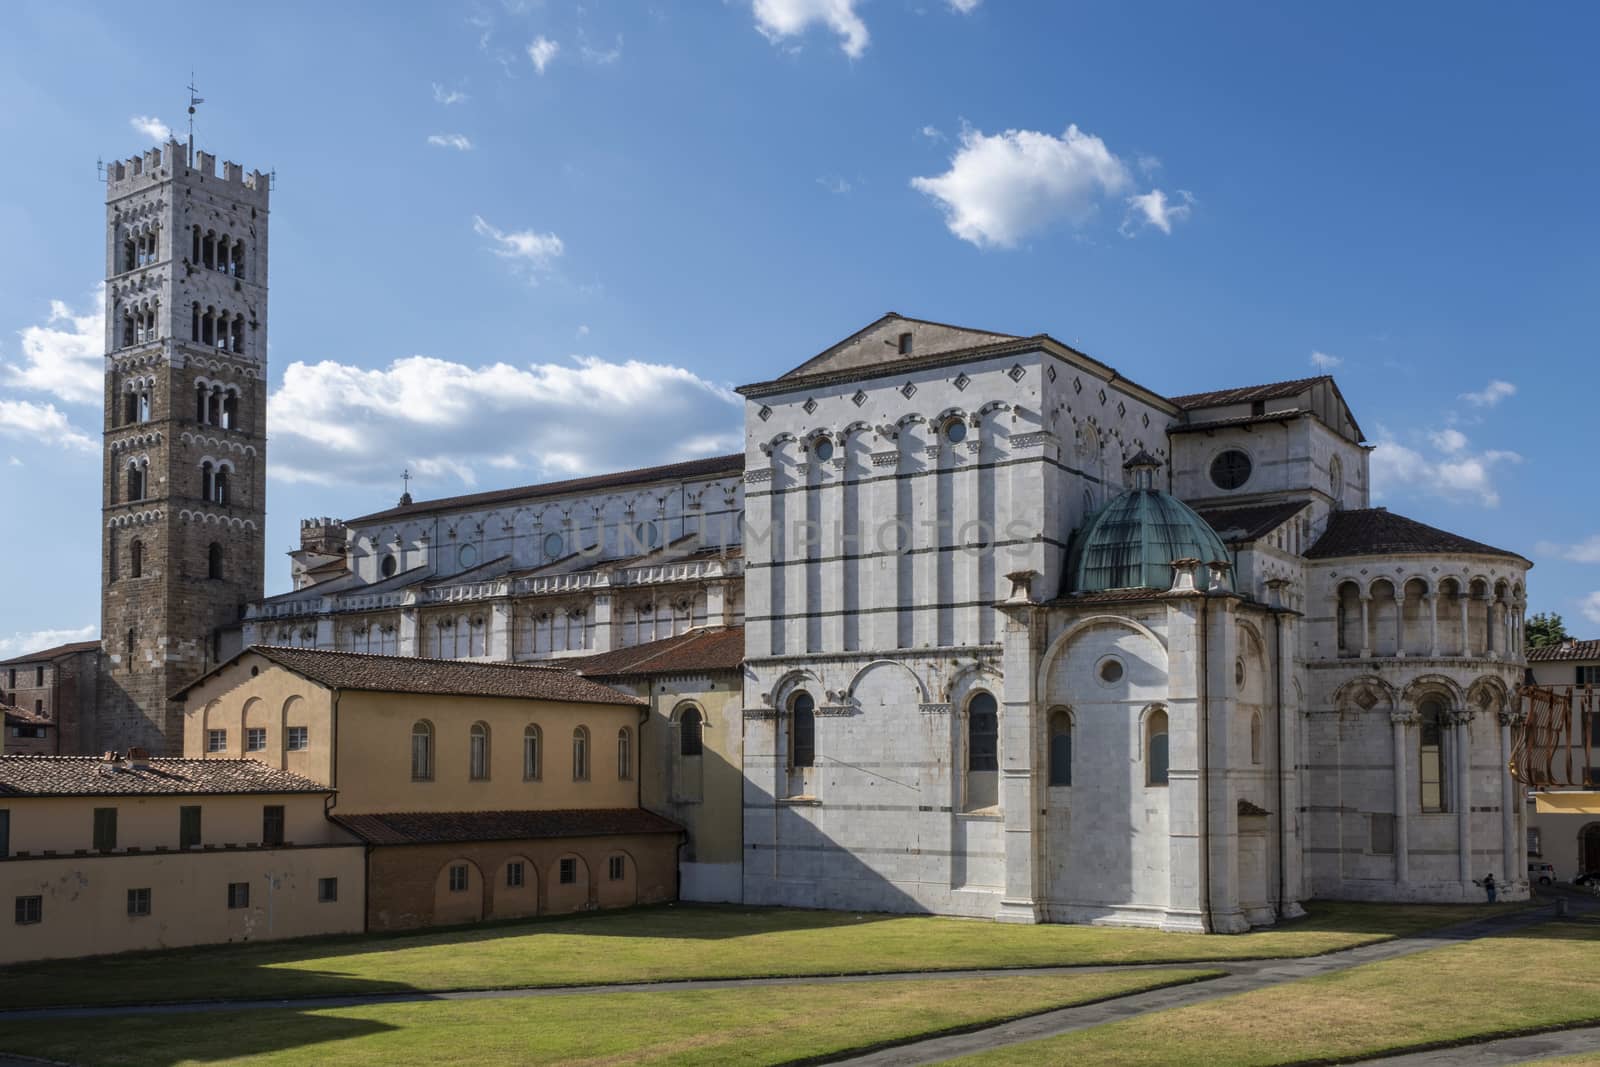 Lucca, Italy, June 8, 2019:Exterior view of the church of San Michele in Foro, a Roman Catholic basilica church in Lucca, Tuscany, central Italy, built over the ancient Roman forum.